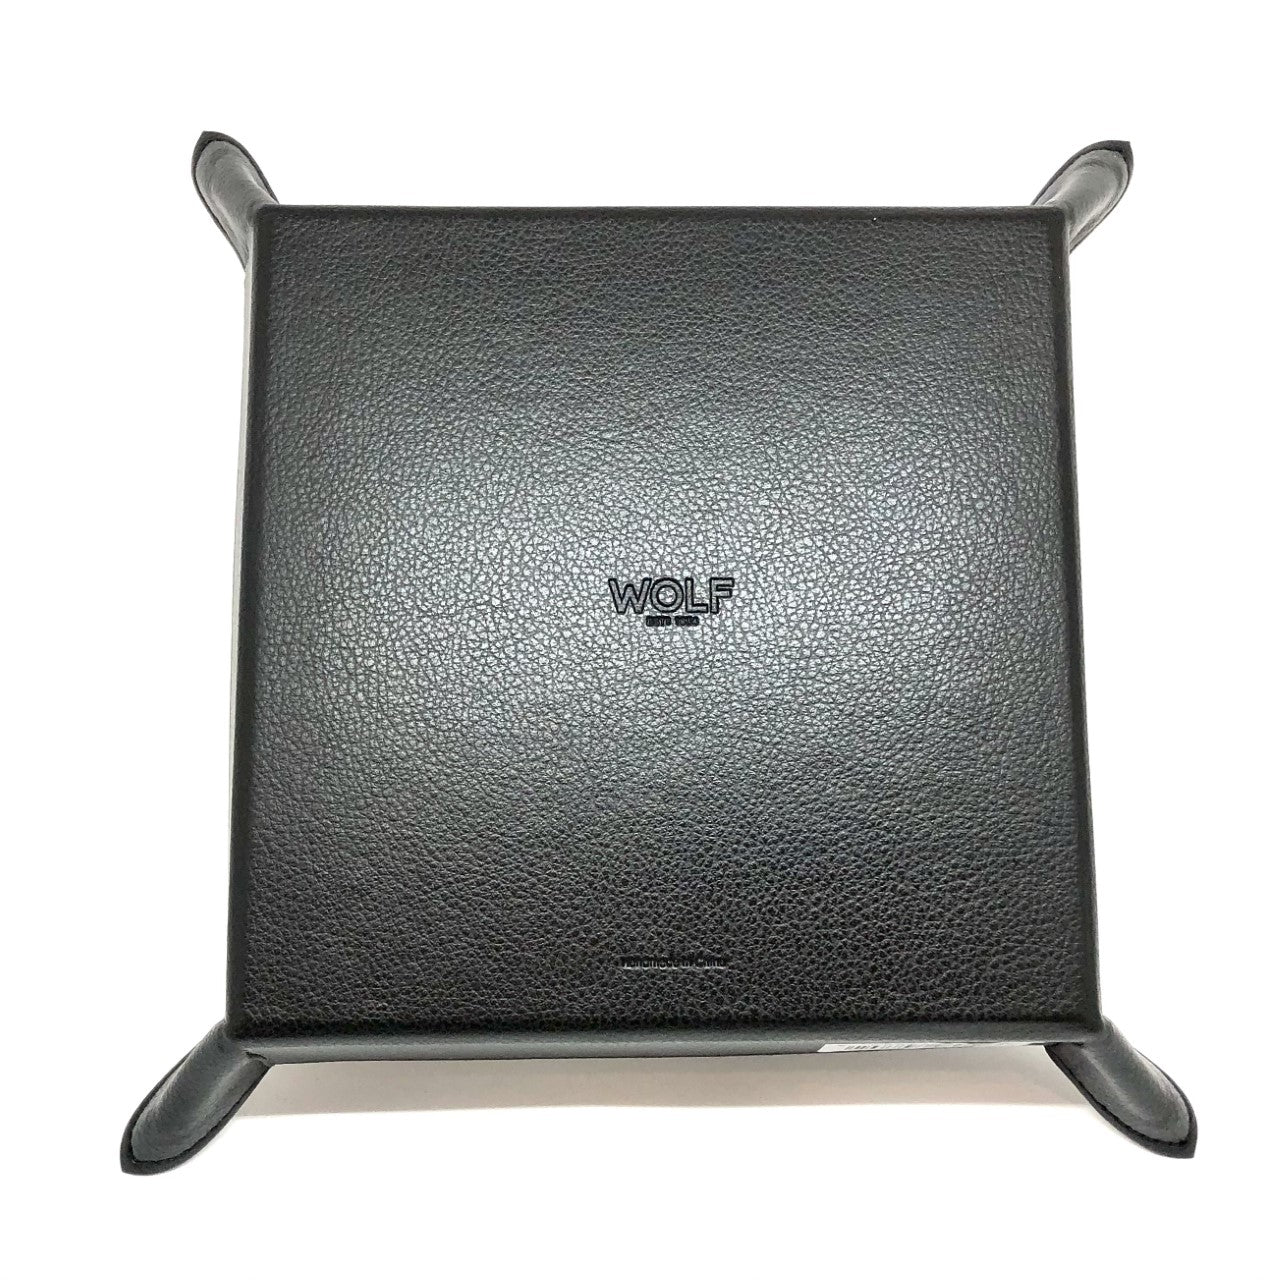 WOLF & IJL Black Leather and Plaid Fabric Accessory Tray